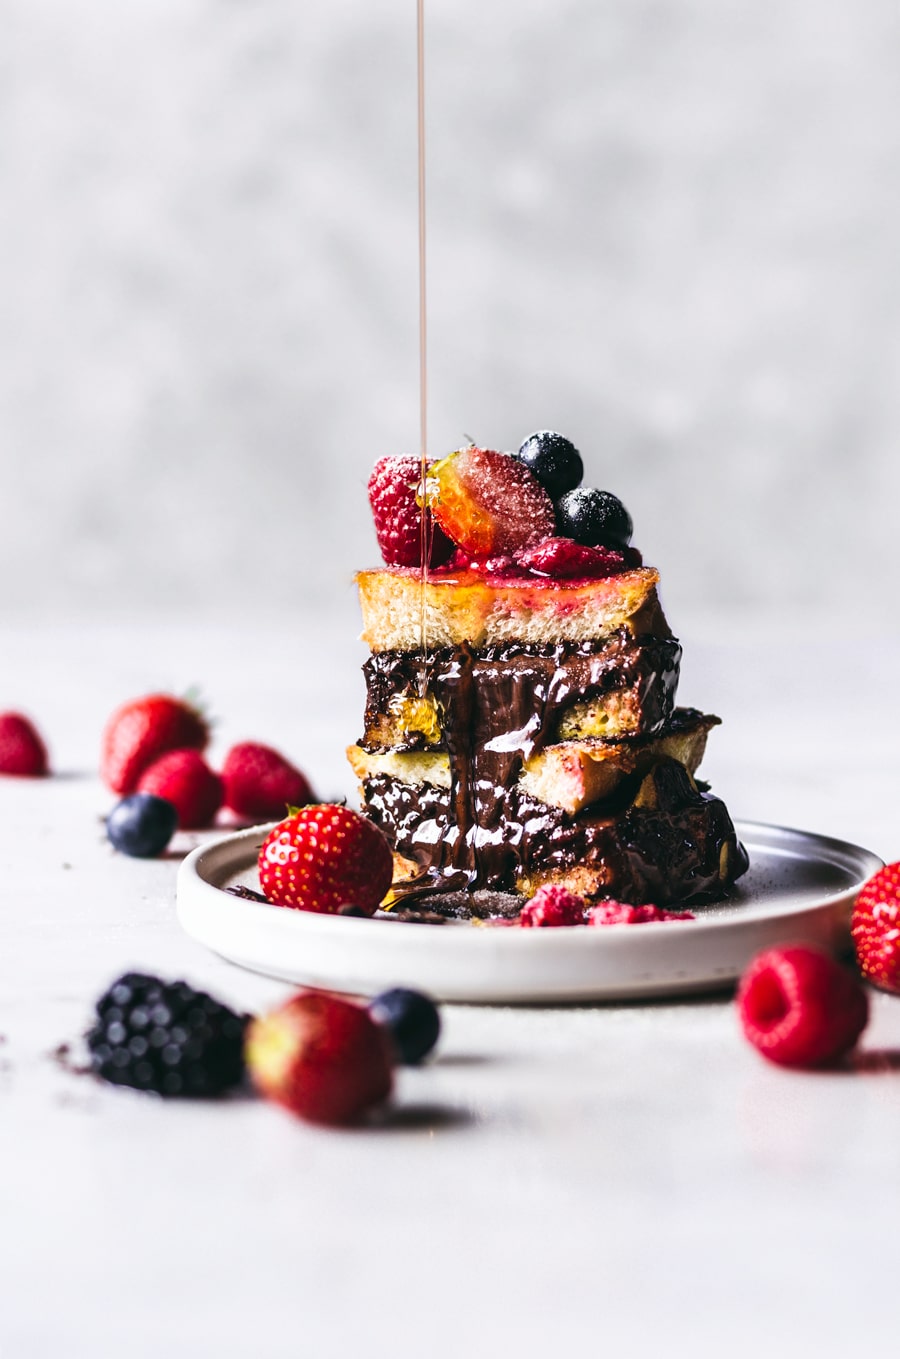 Maple syrup being drizzled on to stacked Nutella & Dark Chocolate Stuffed French Toast, with some berries scattered around it.